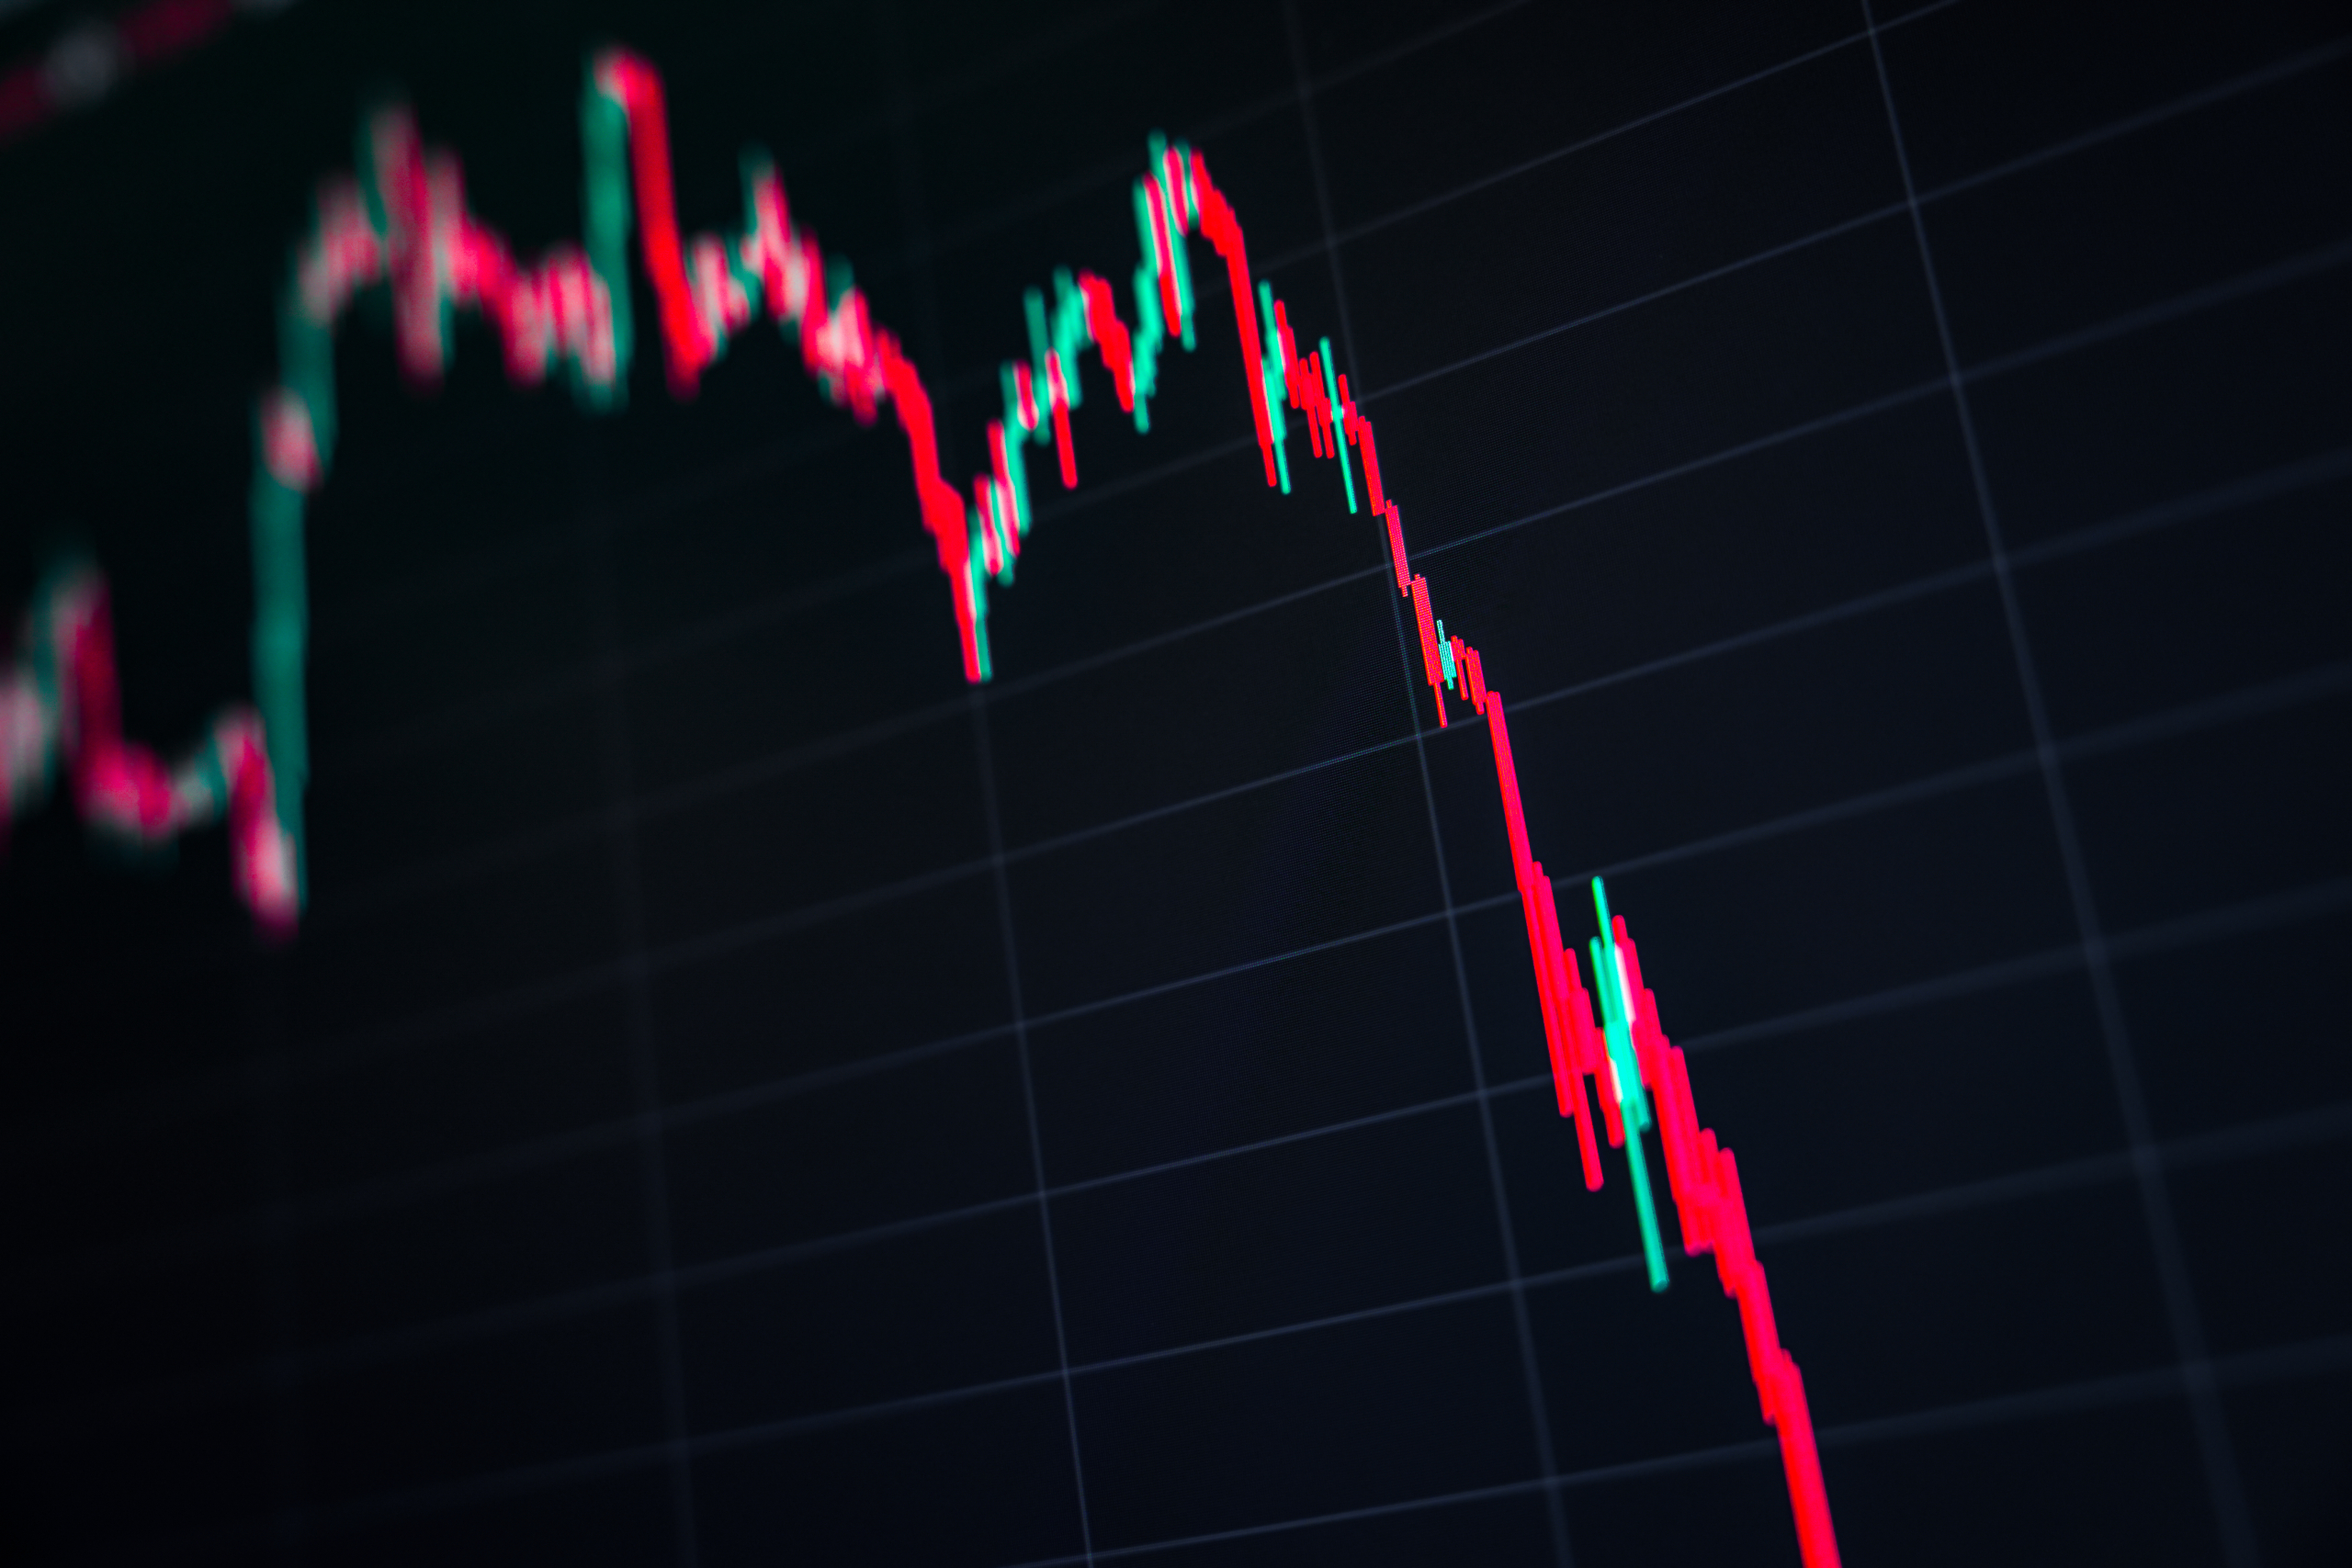 Analyst Predicts: Bitcoin Could Drop to $12K
